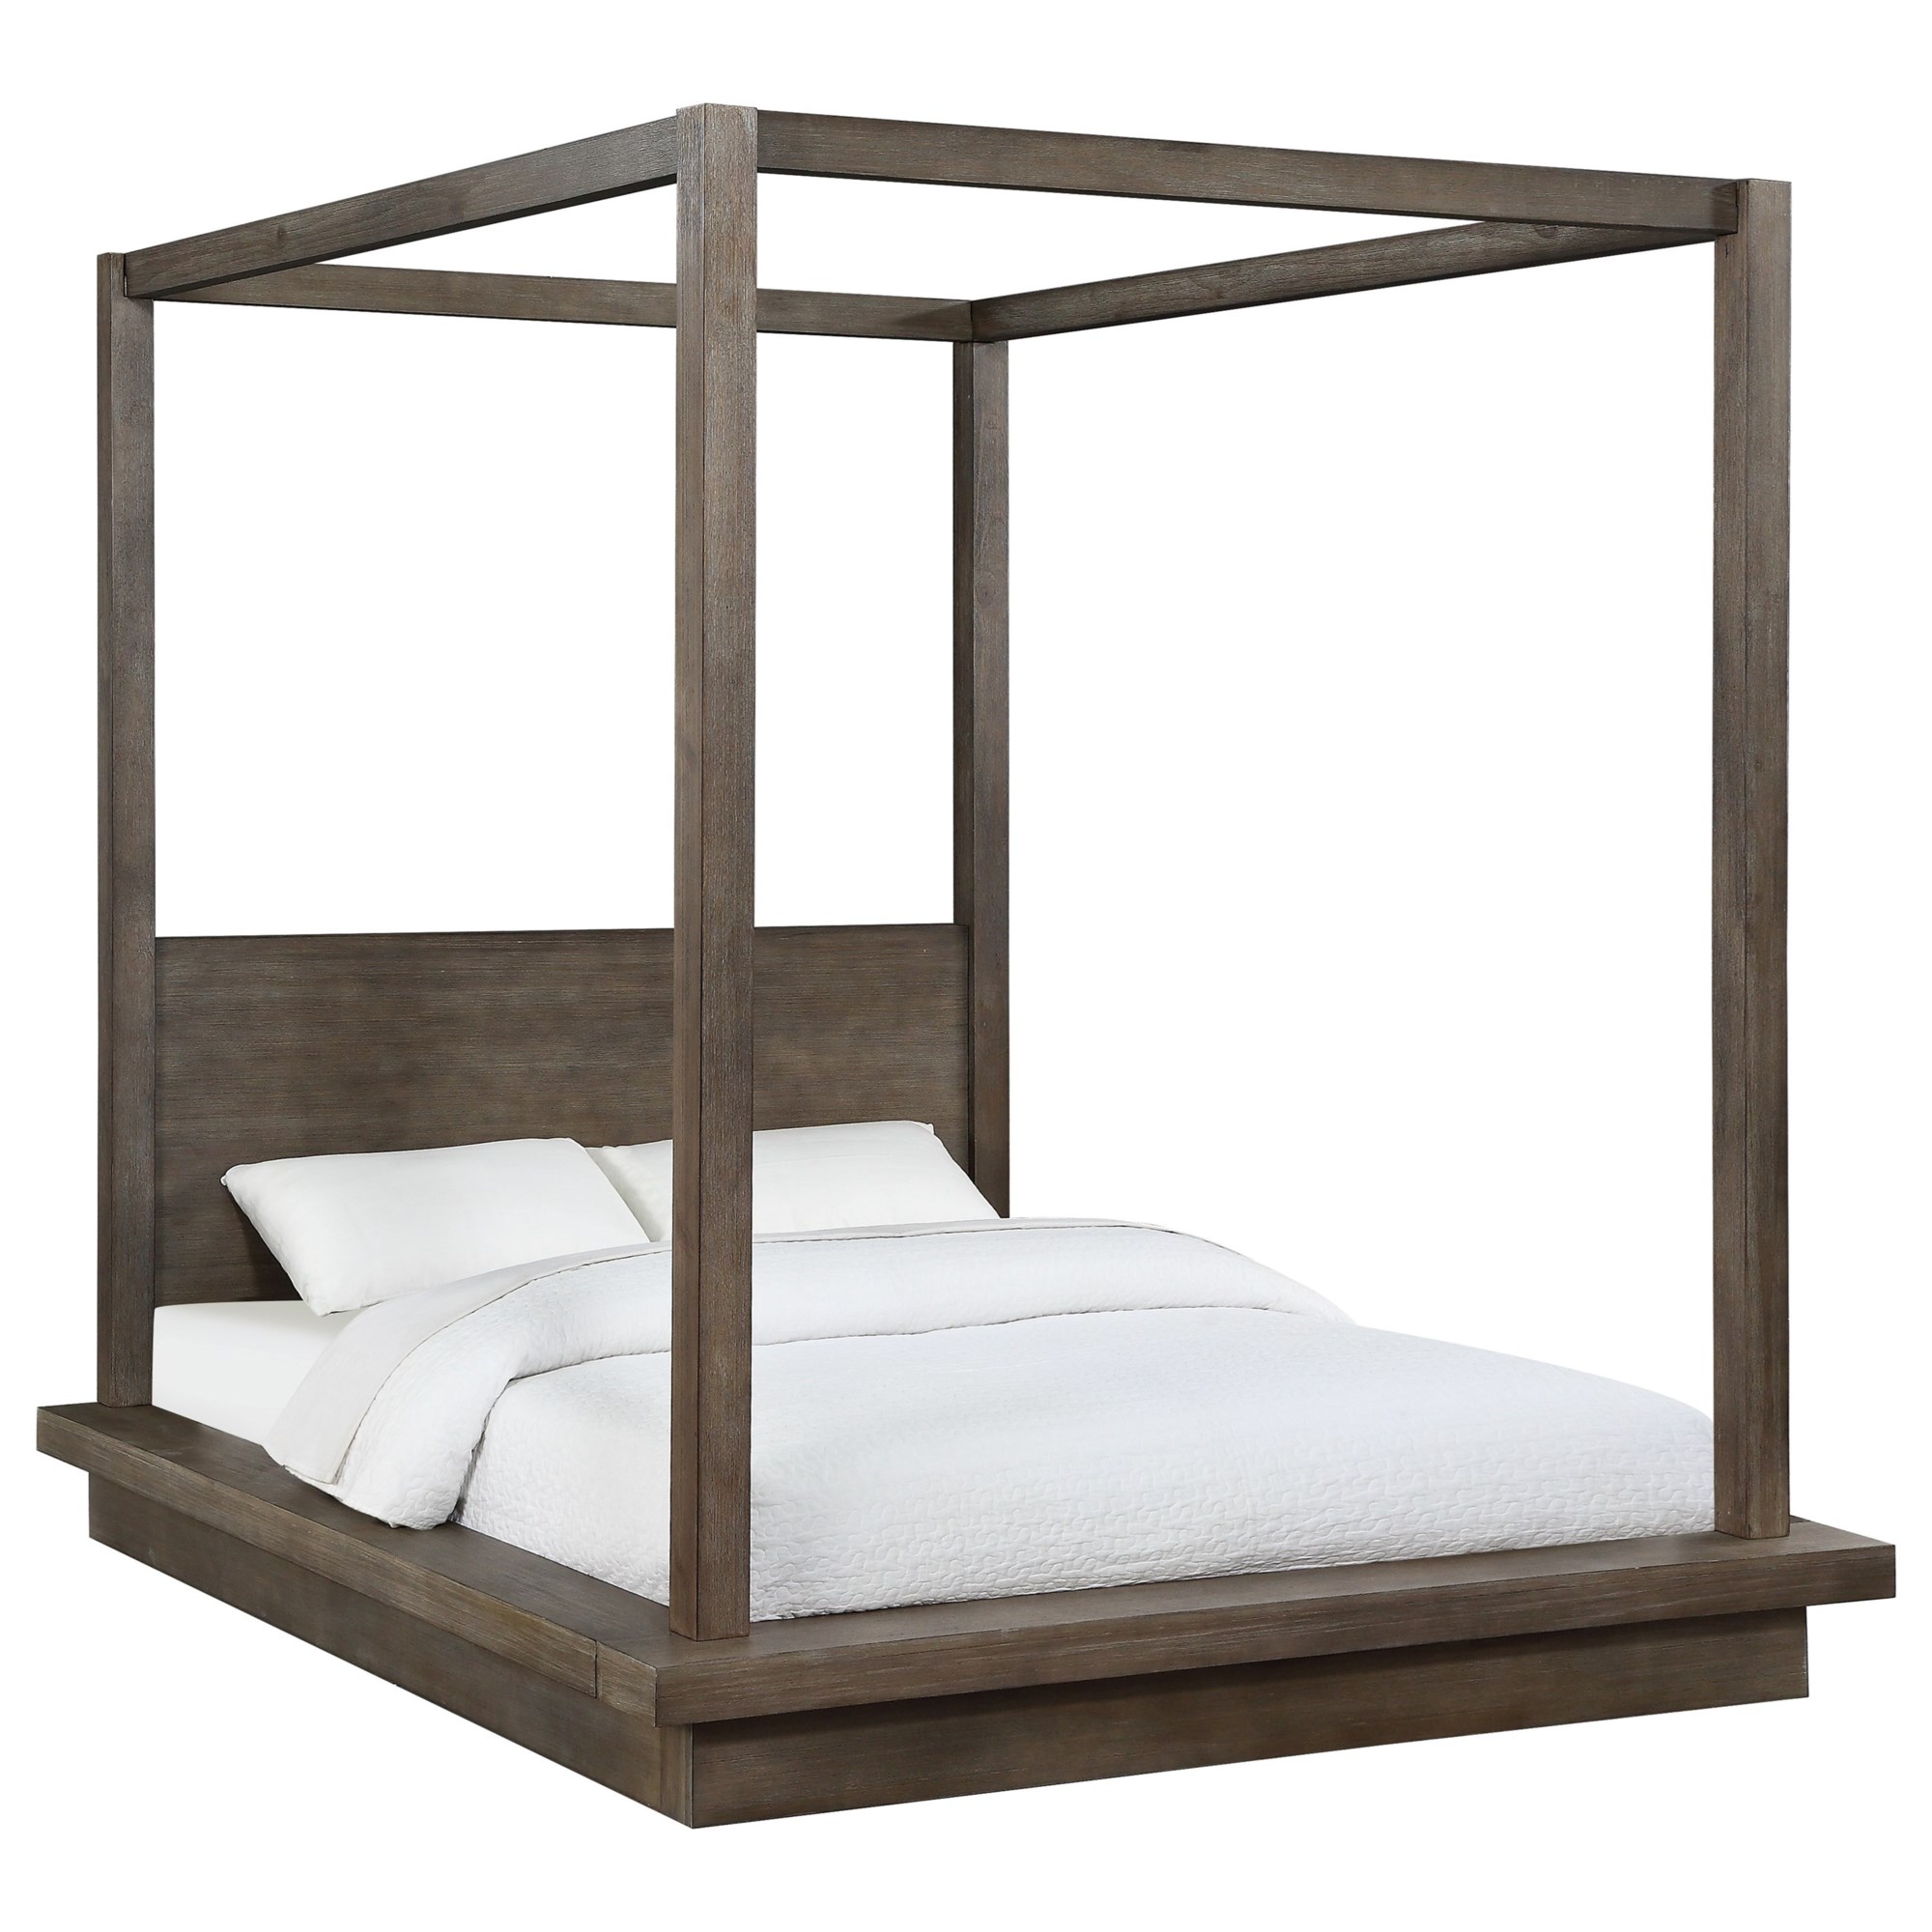 Modus International Melbourne 8D64F7 Contemporary King Canopy Bed ...